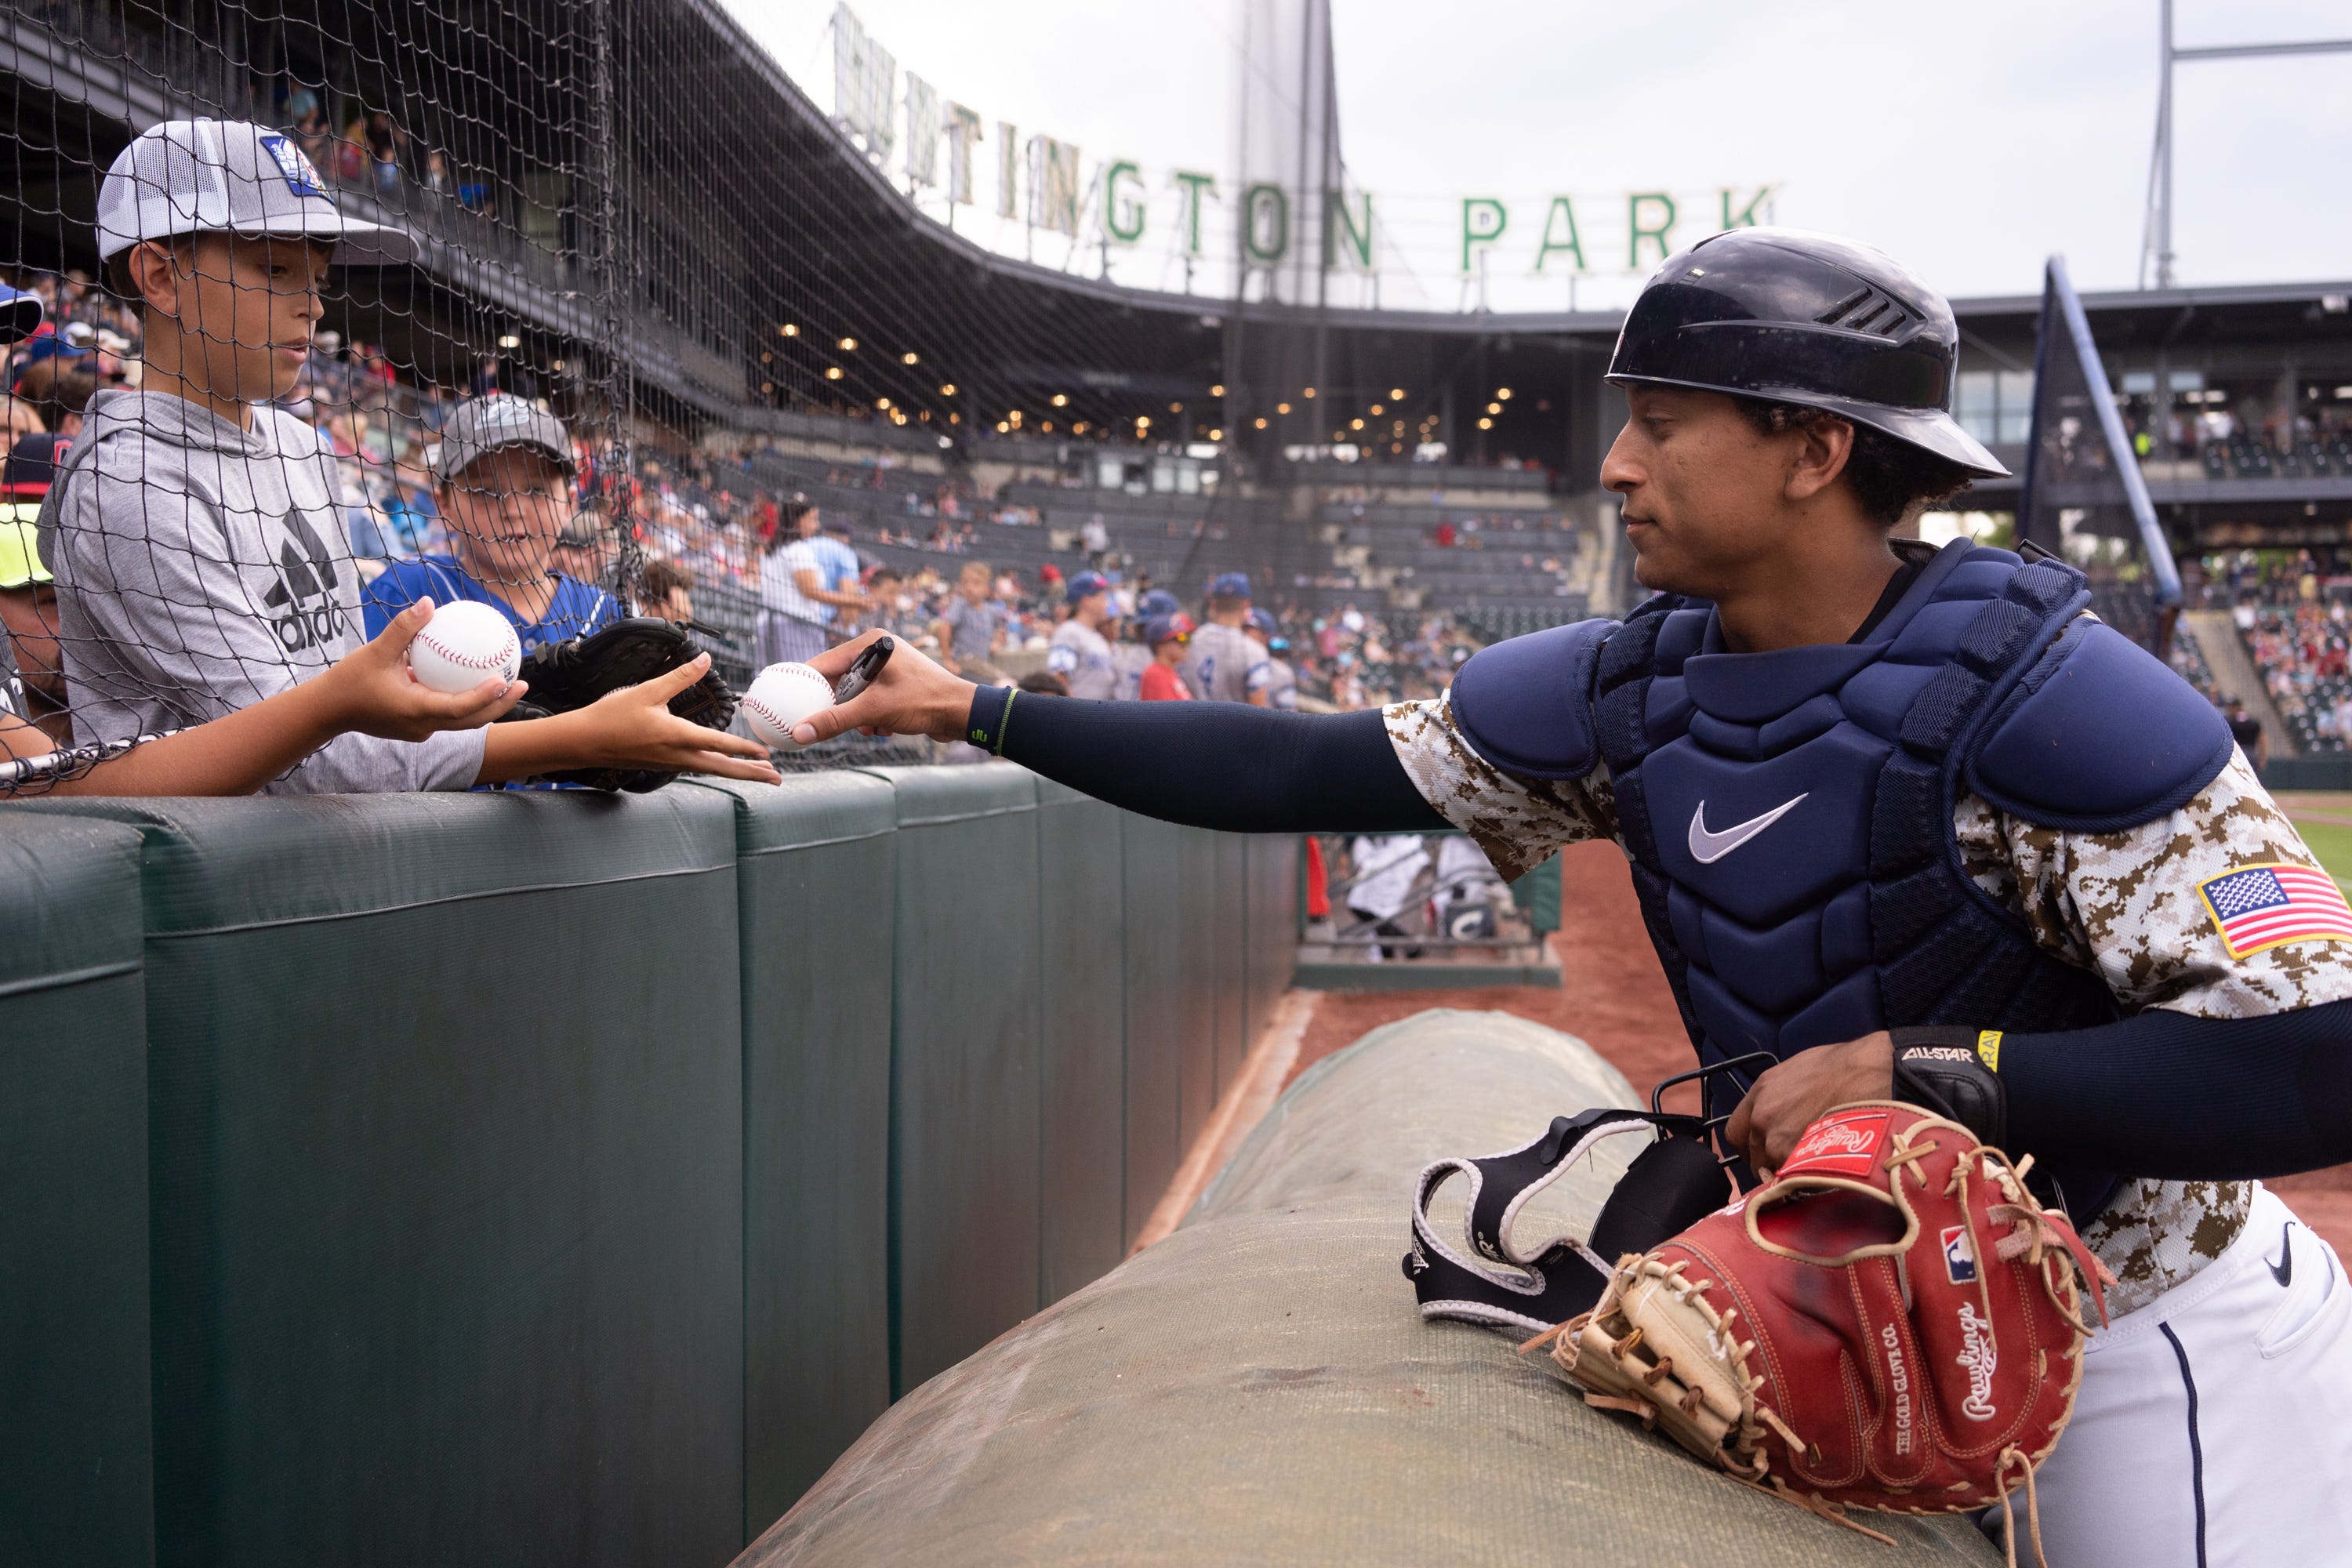 Columbus Clippers catcher Bo Naylor (since promoted to the Cleveland Guardians) signs baseballs for fans before a game at Huntington Park in July 2022.